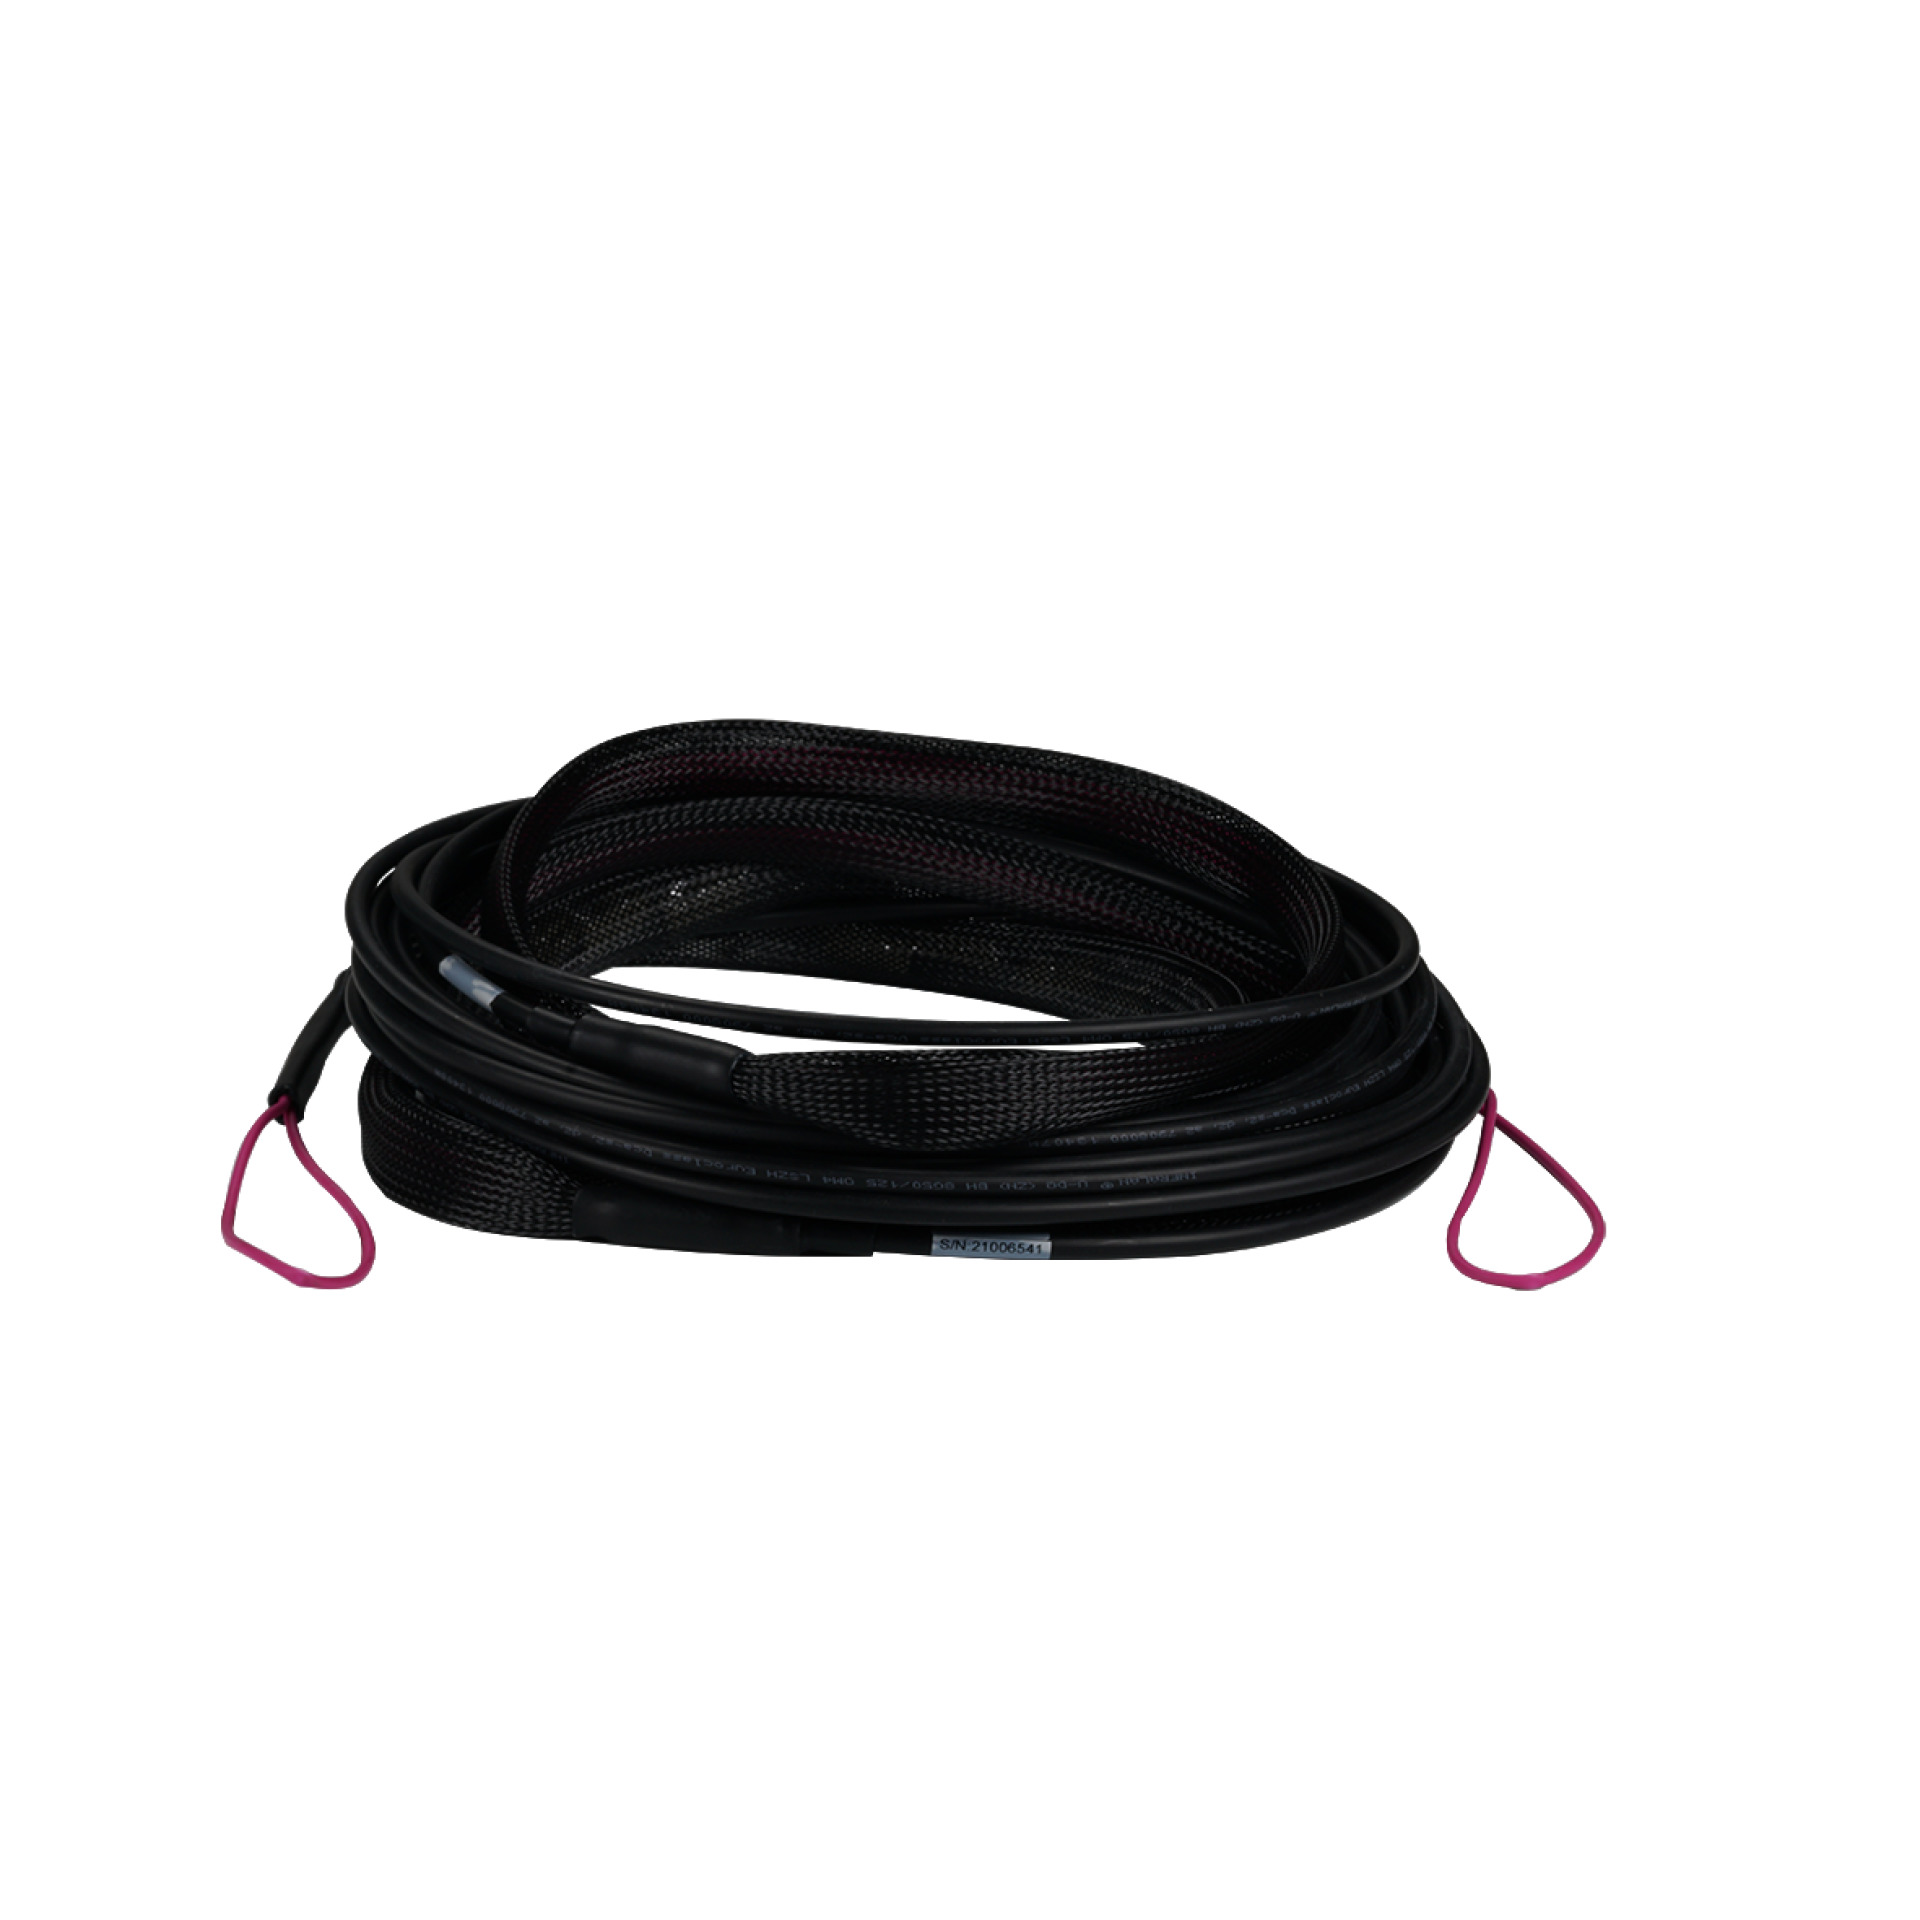 Trunk cable U-DQ(ZN)BH 12G 50/125, SC/SC OM4 180m